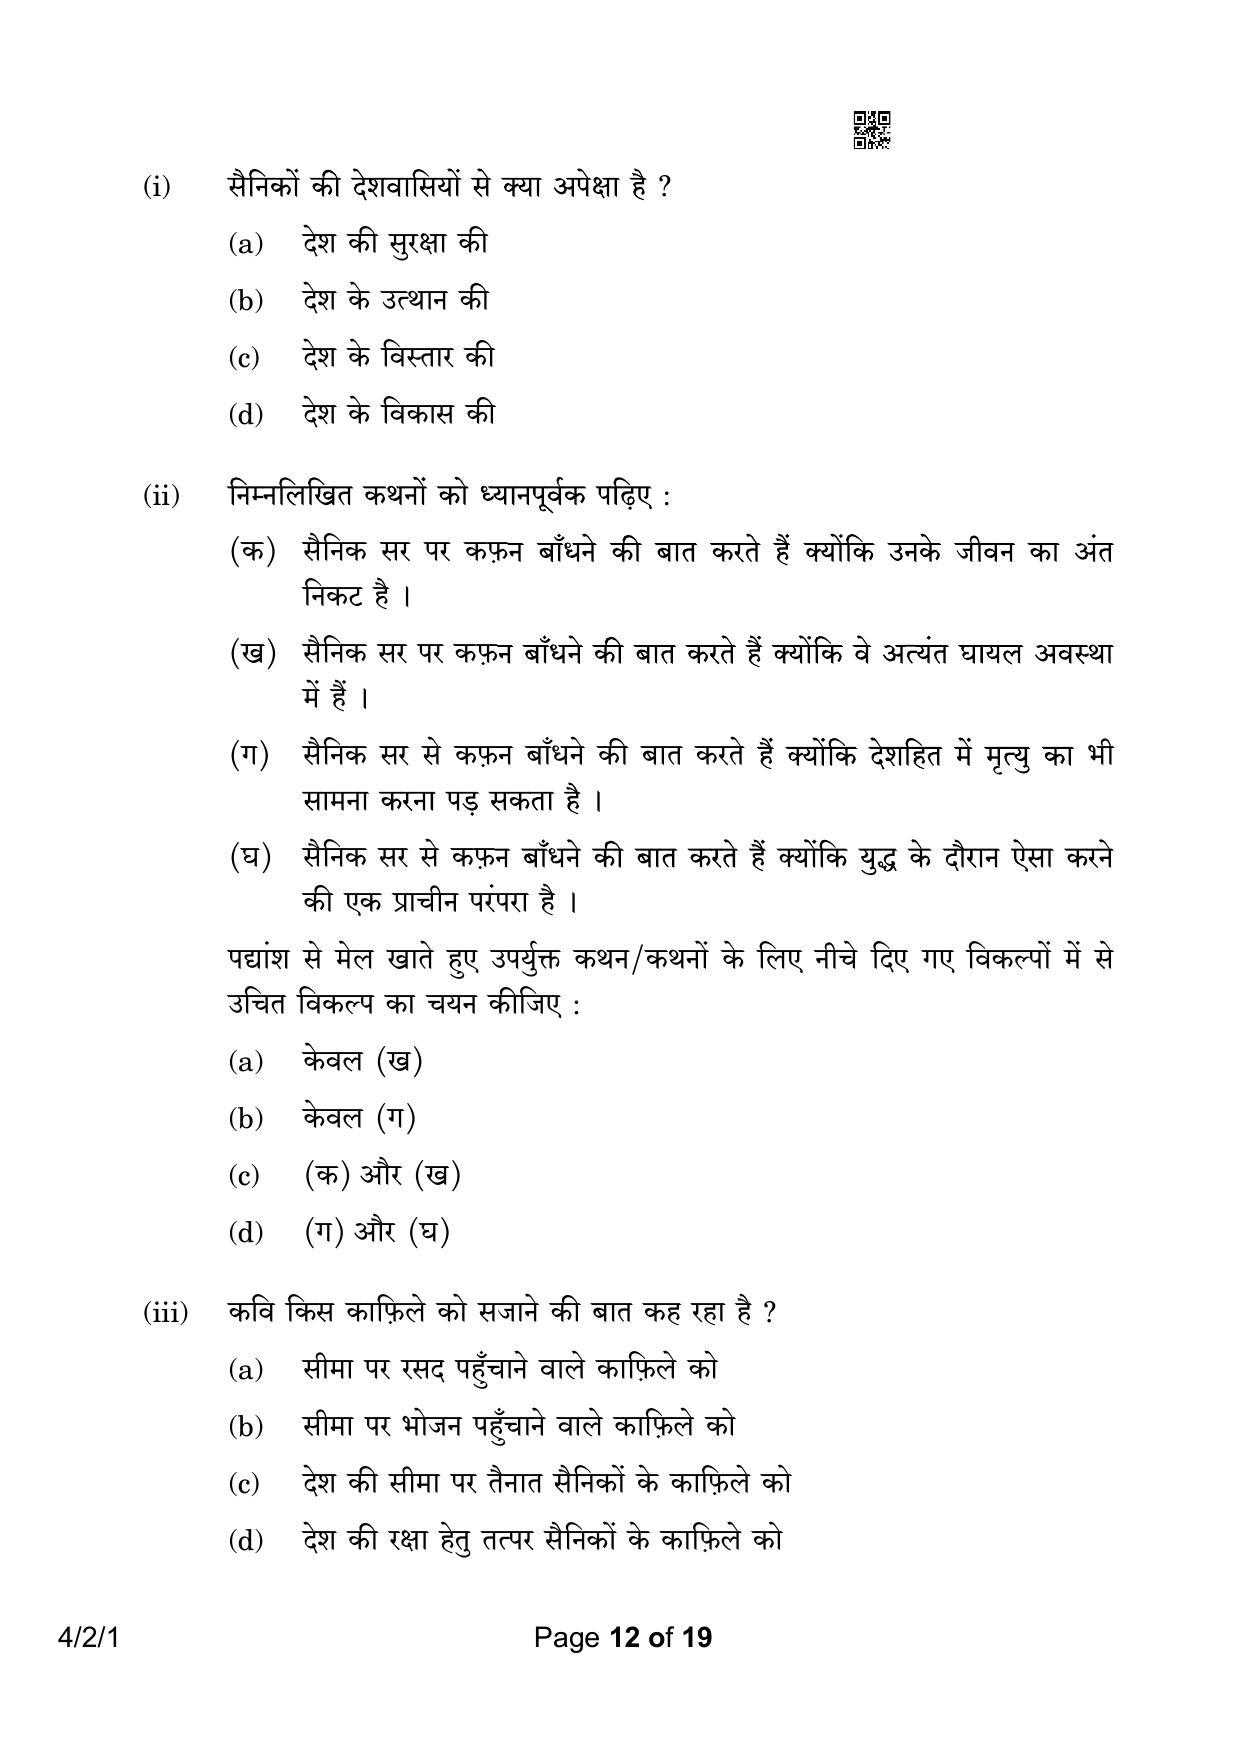 CBSE Class 10 4-2-1 Hindi B 2023 Question Paper - Page 12